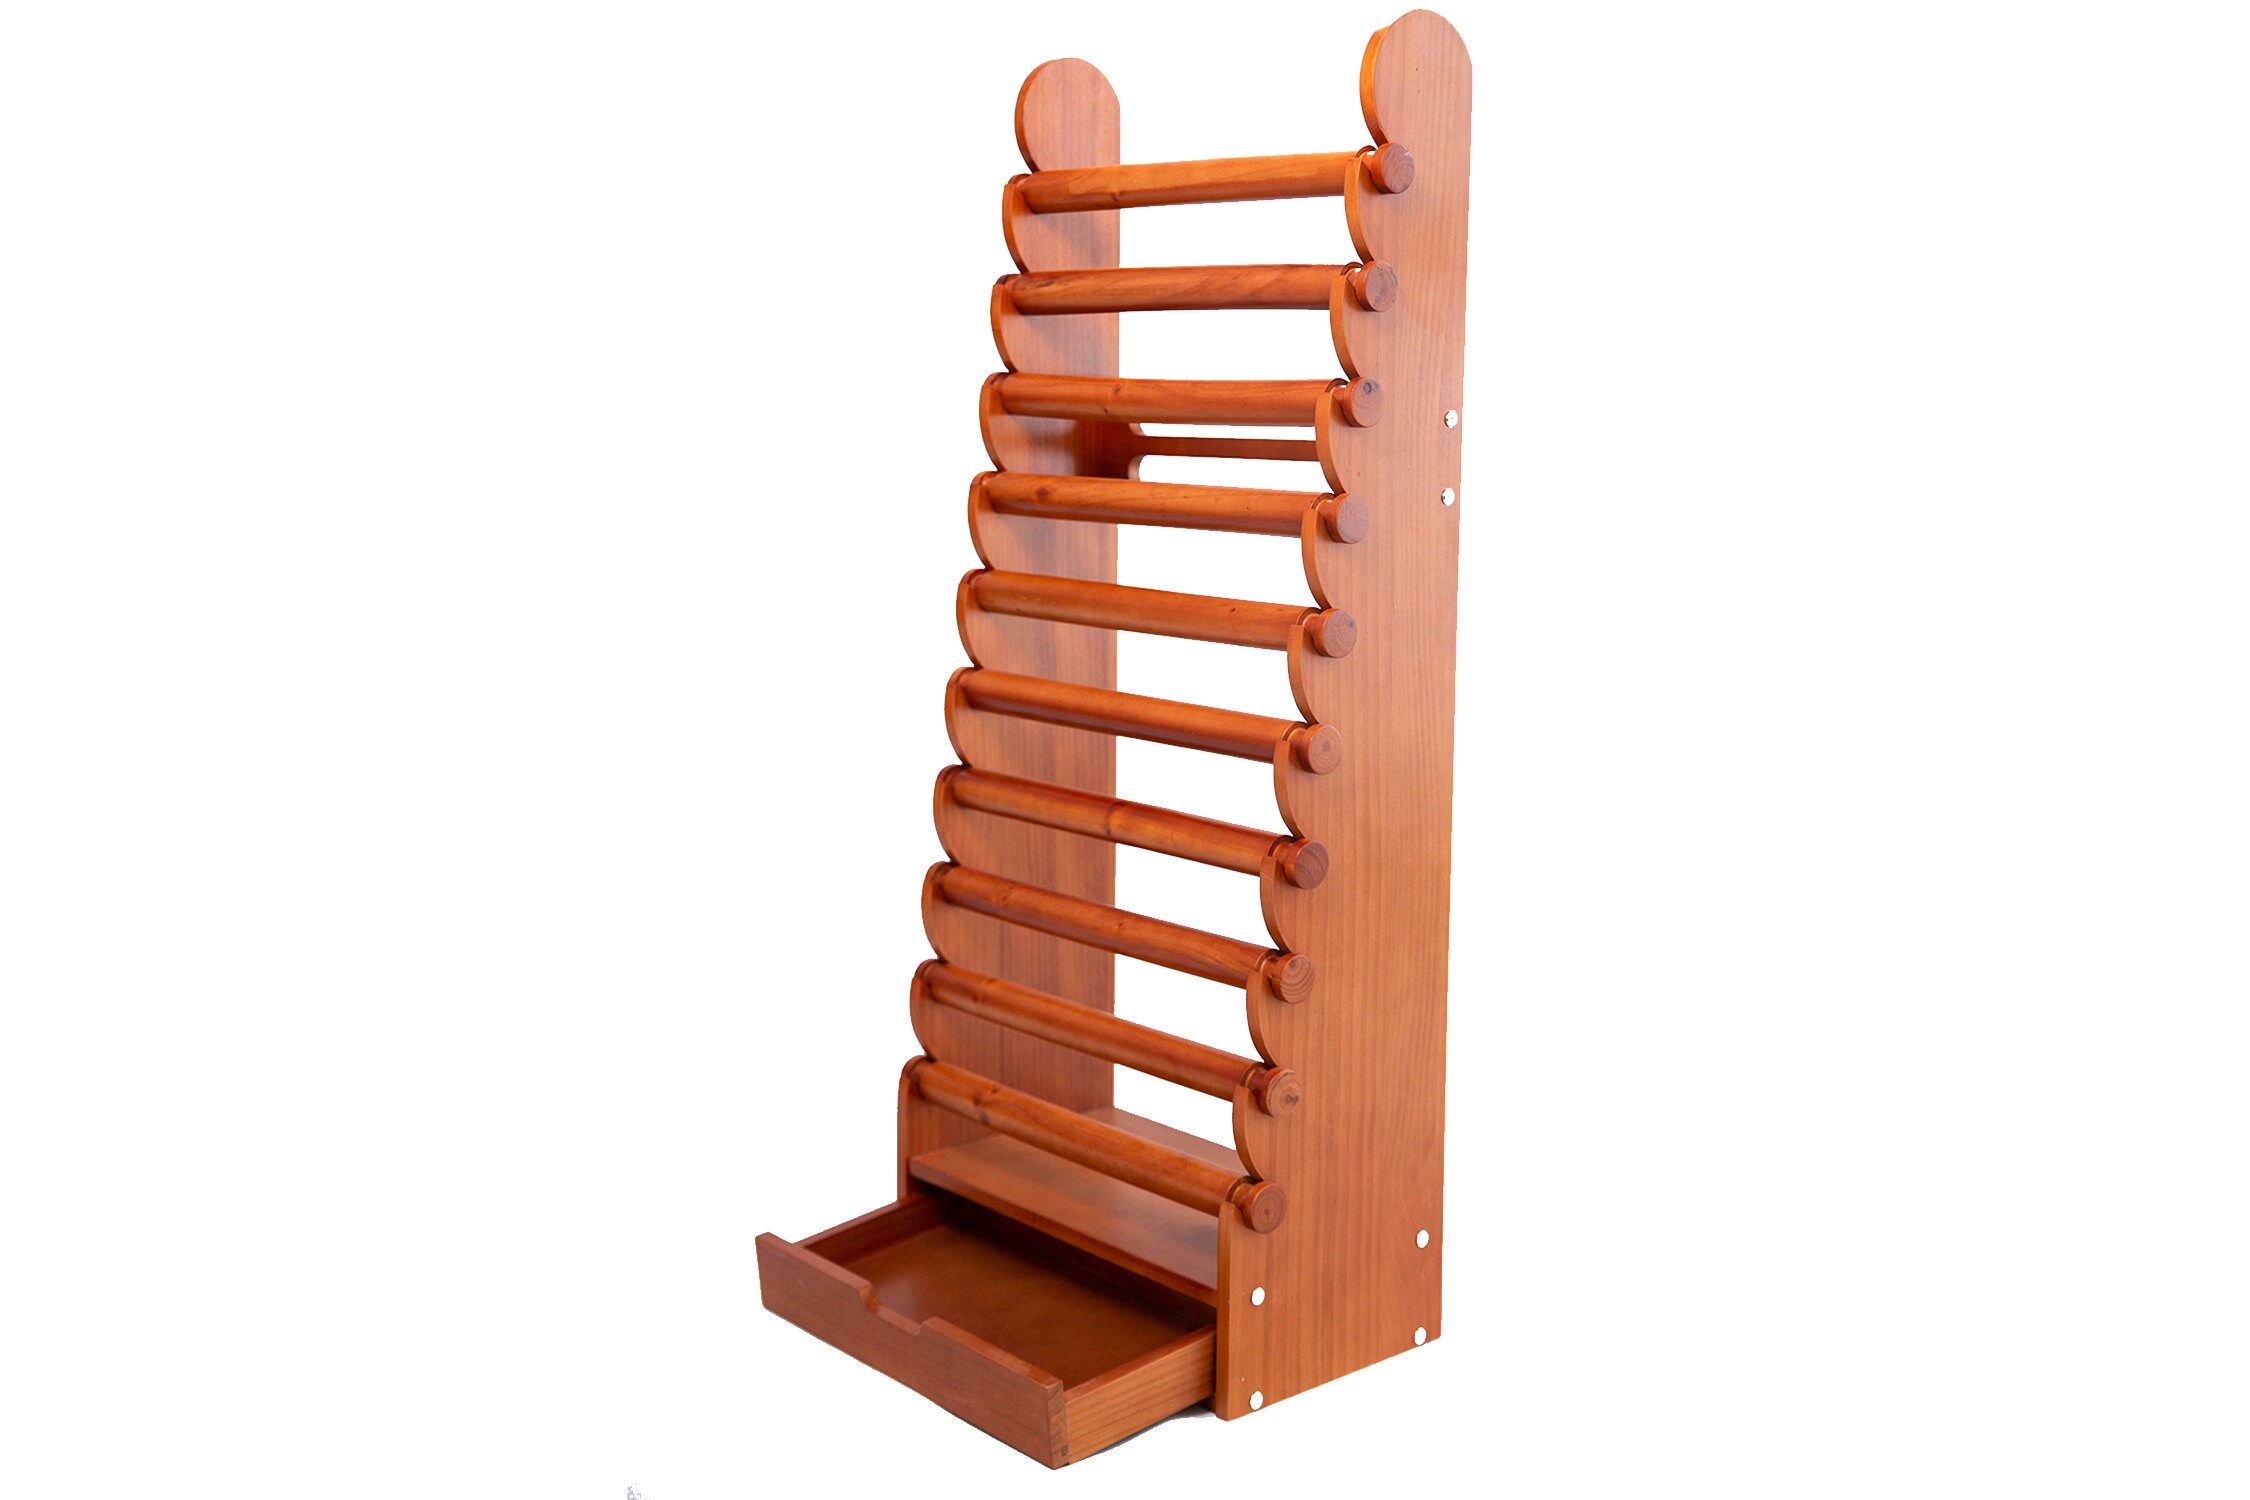 Shoe Stand in Ahmedabad - Dealers, Manufacturers & Suppliers - Justdial